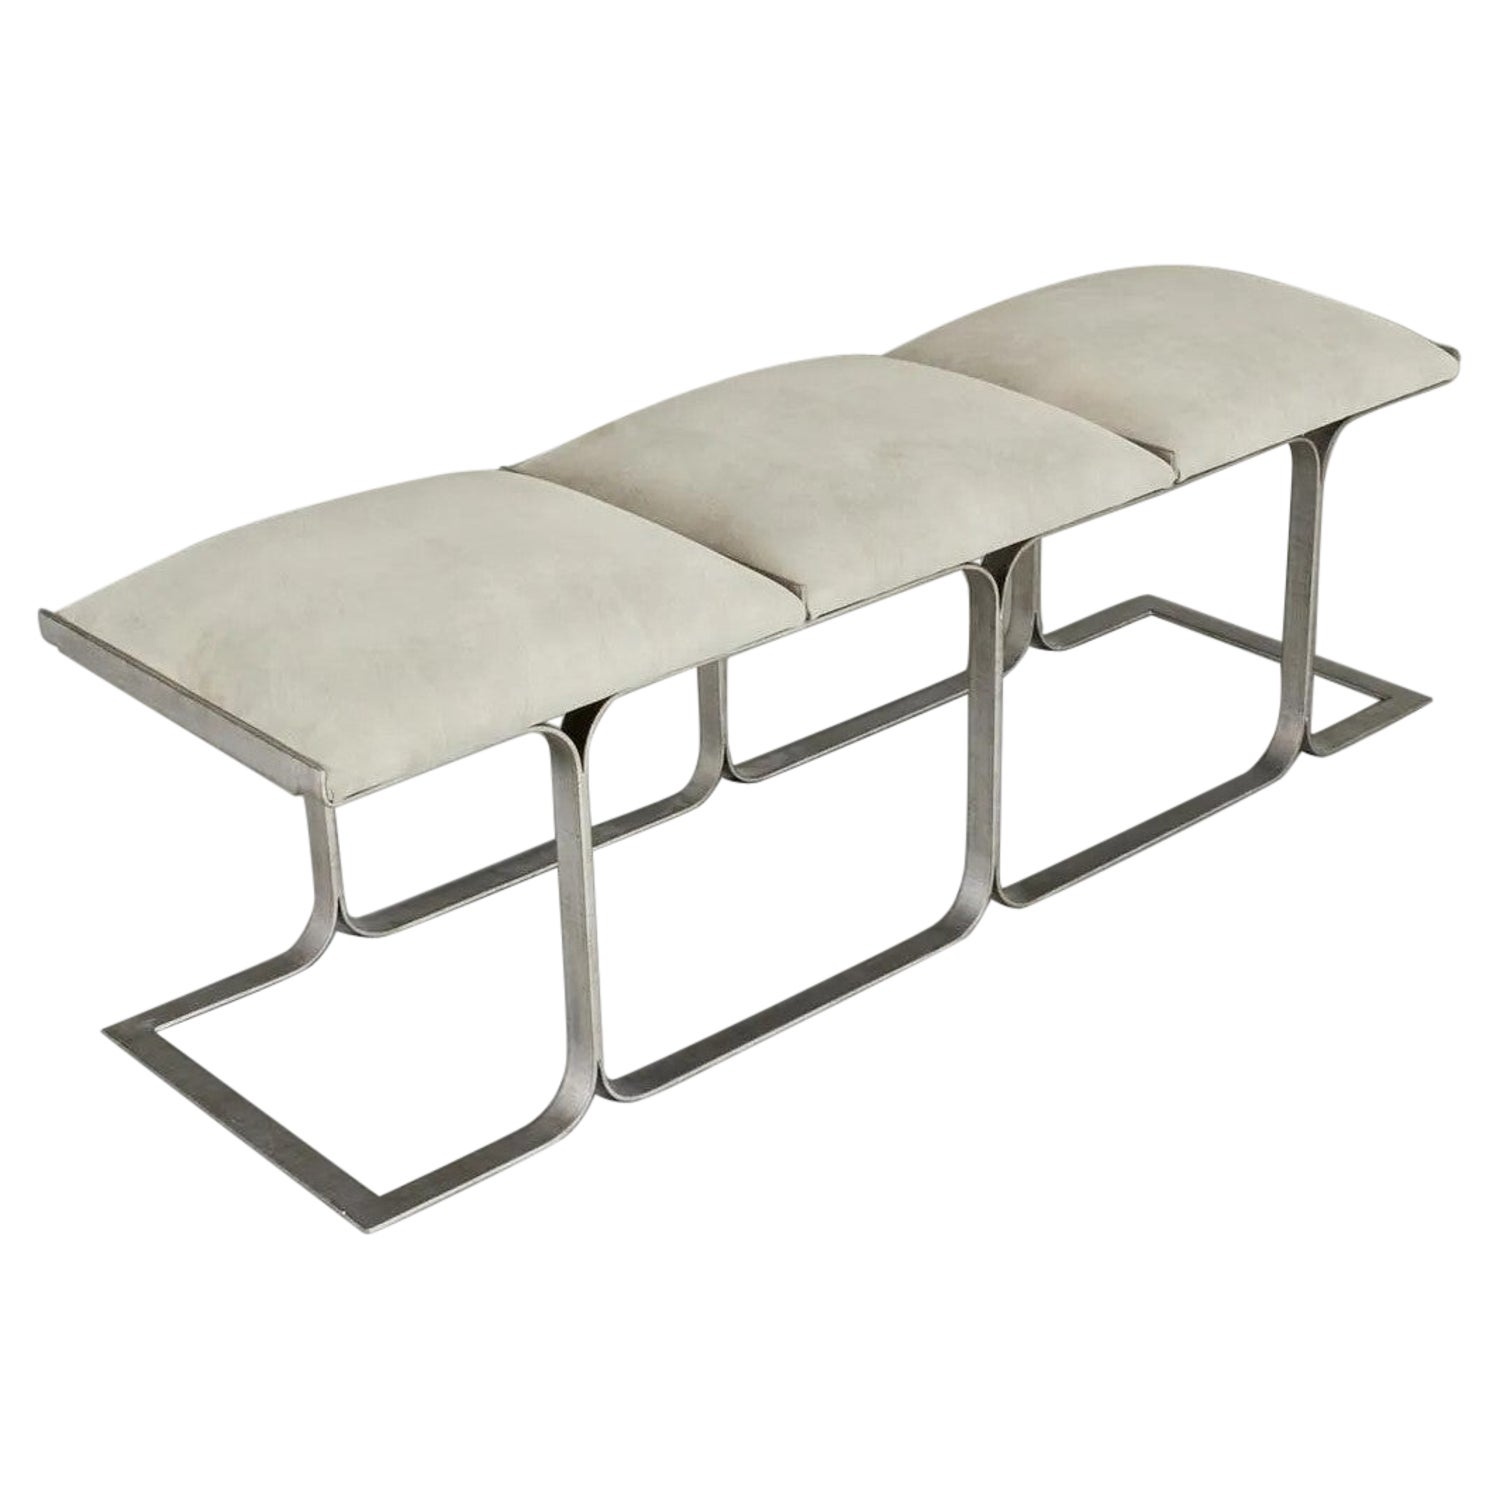 John Behringer Leather 3-Seat Bench Mid-Century Modern For Sale at 1stDibs